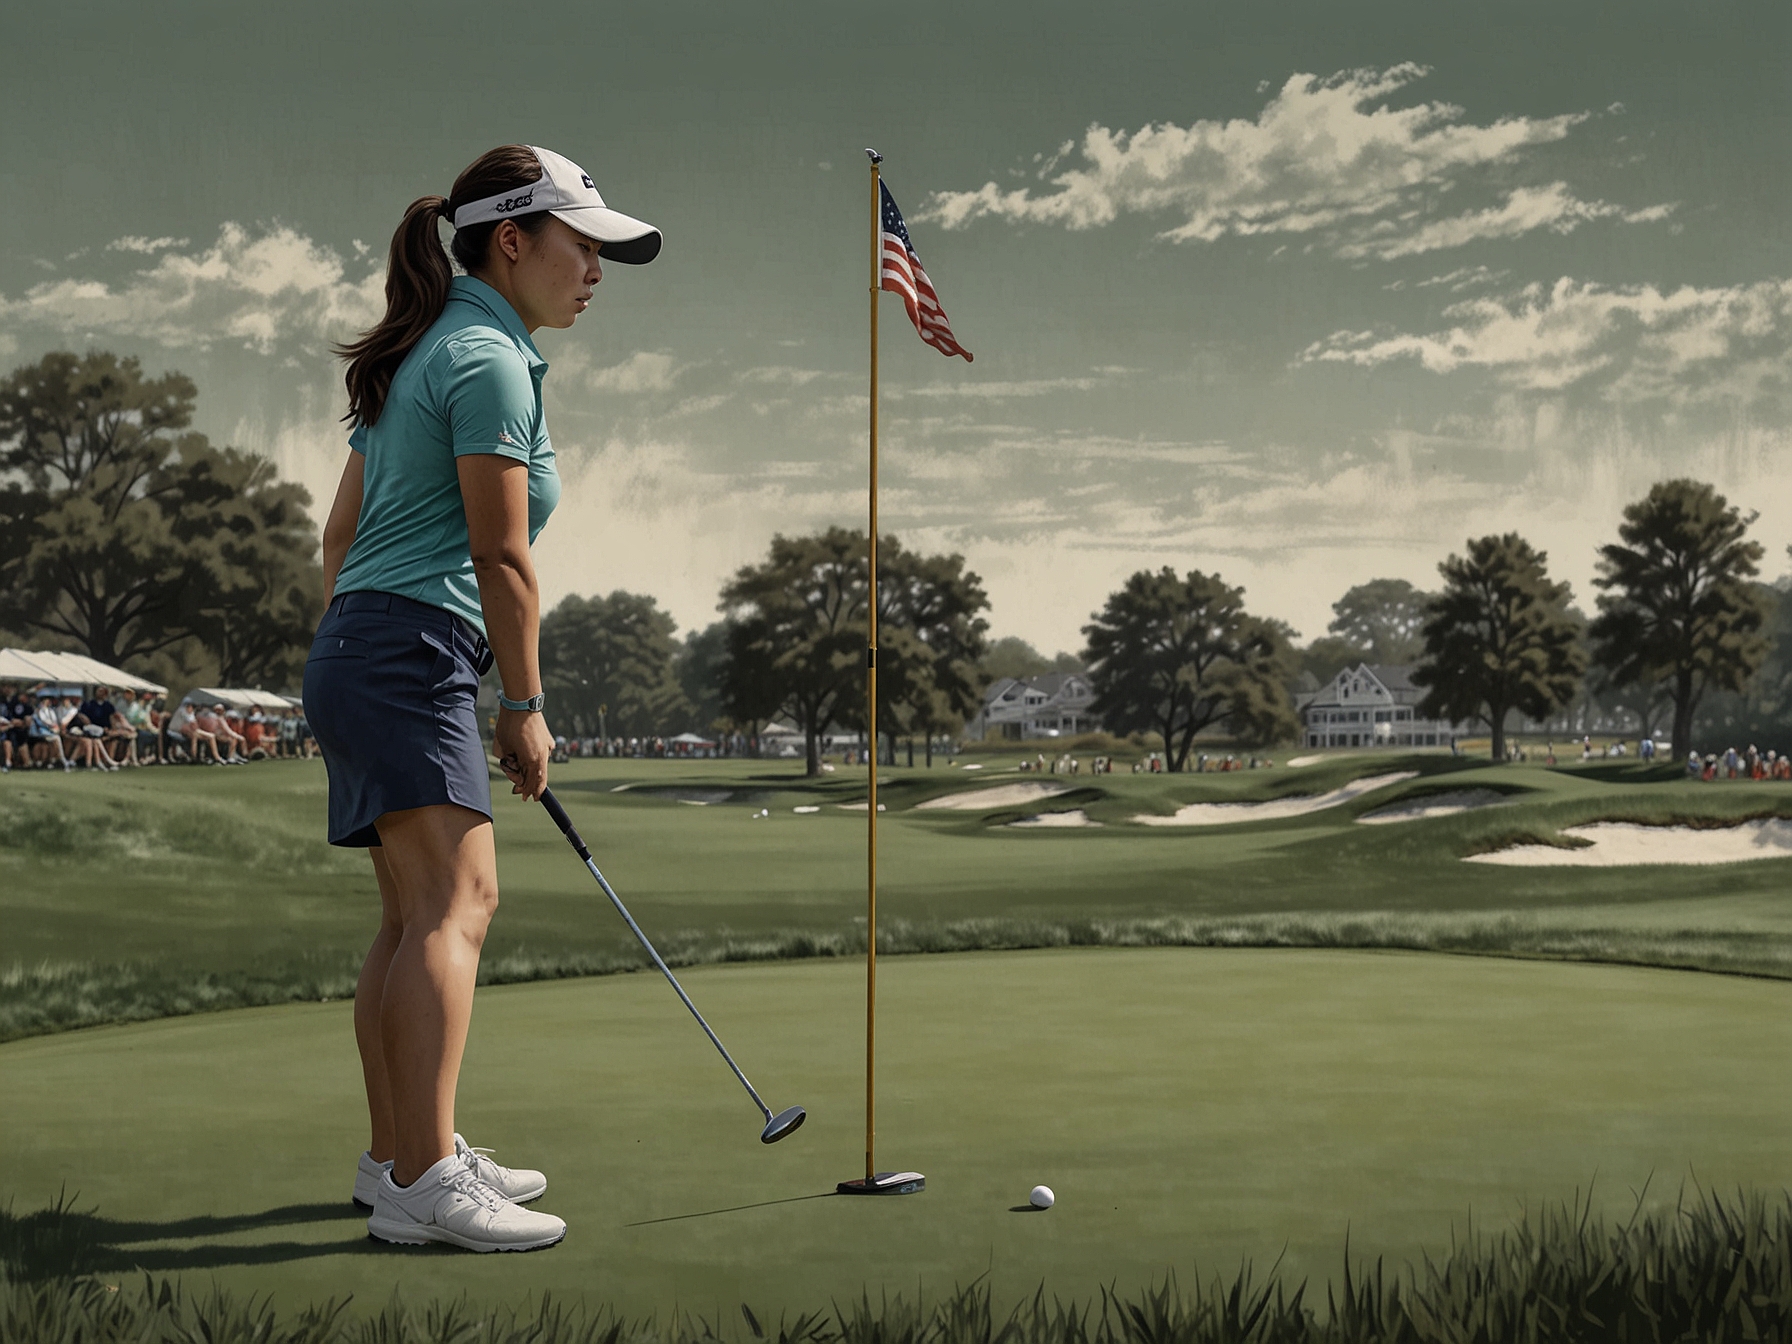 Amy Yang executing a precise putt on the green, showcasing her composed and focused approach during the Women’s PGA Championship. Her minimal errors have placed her in the lead.